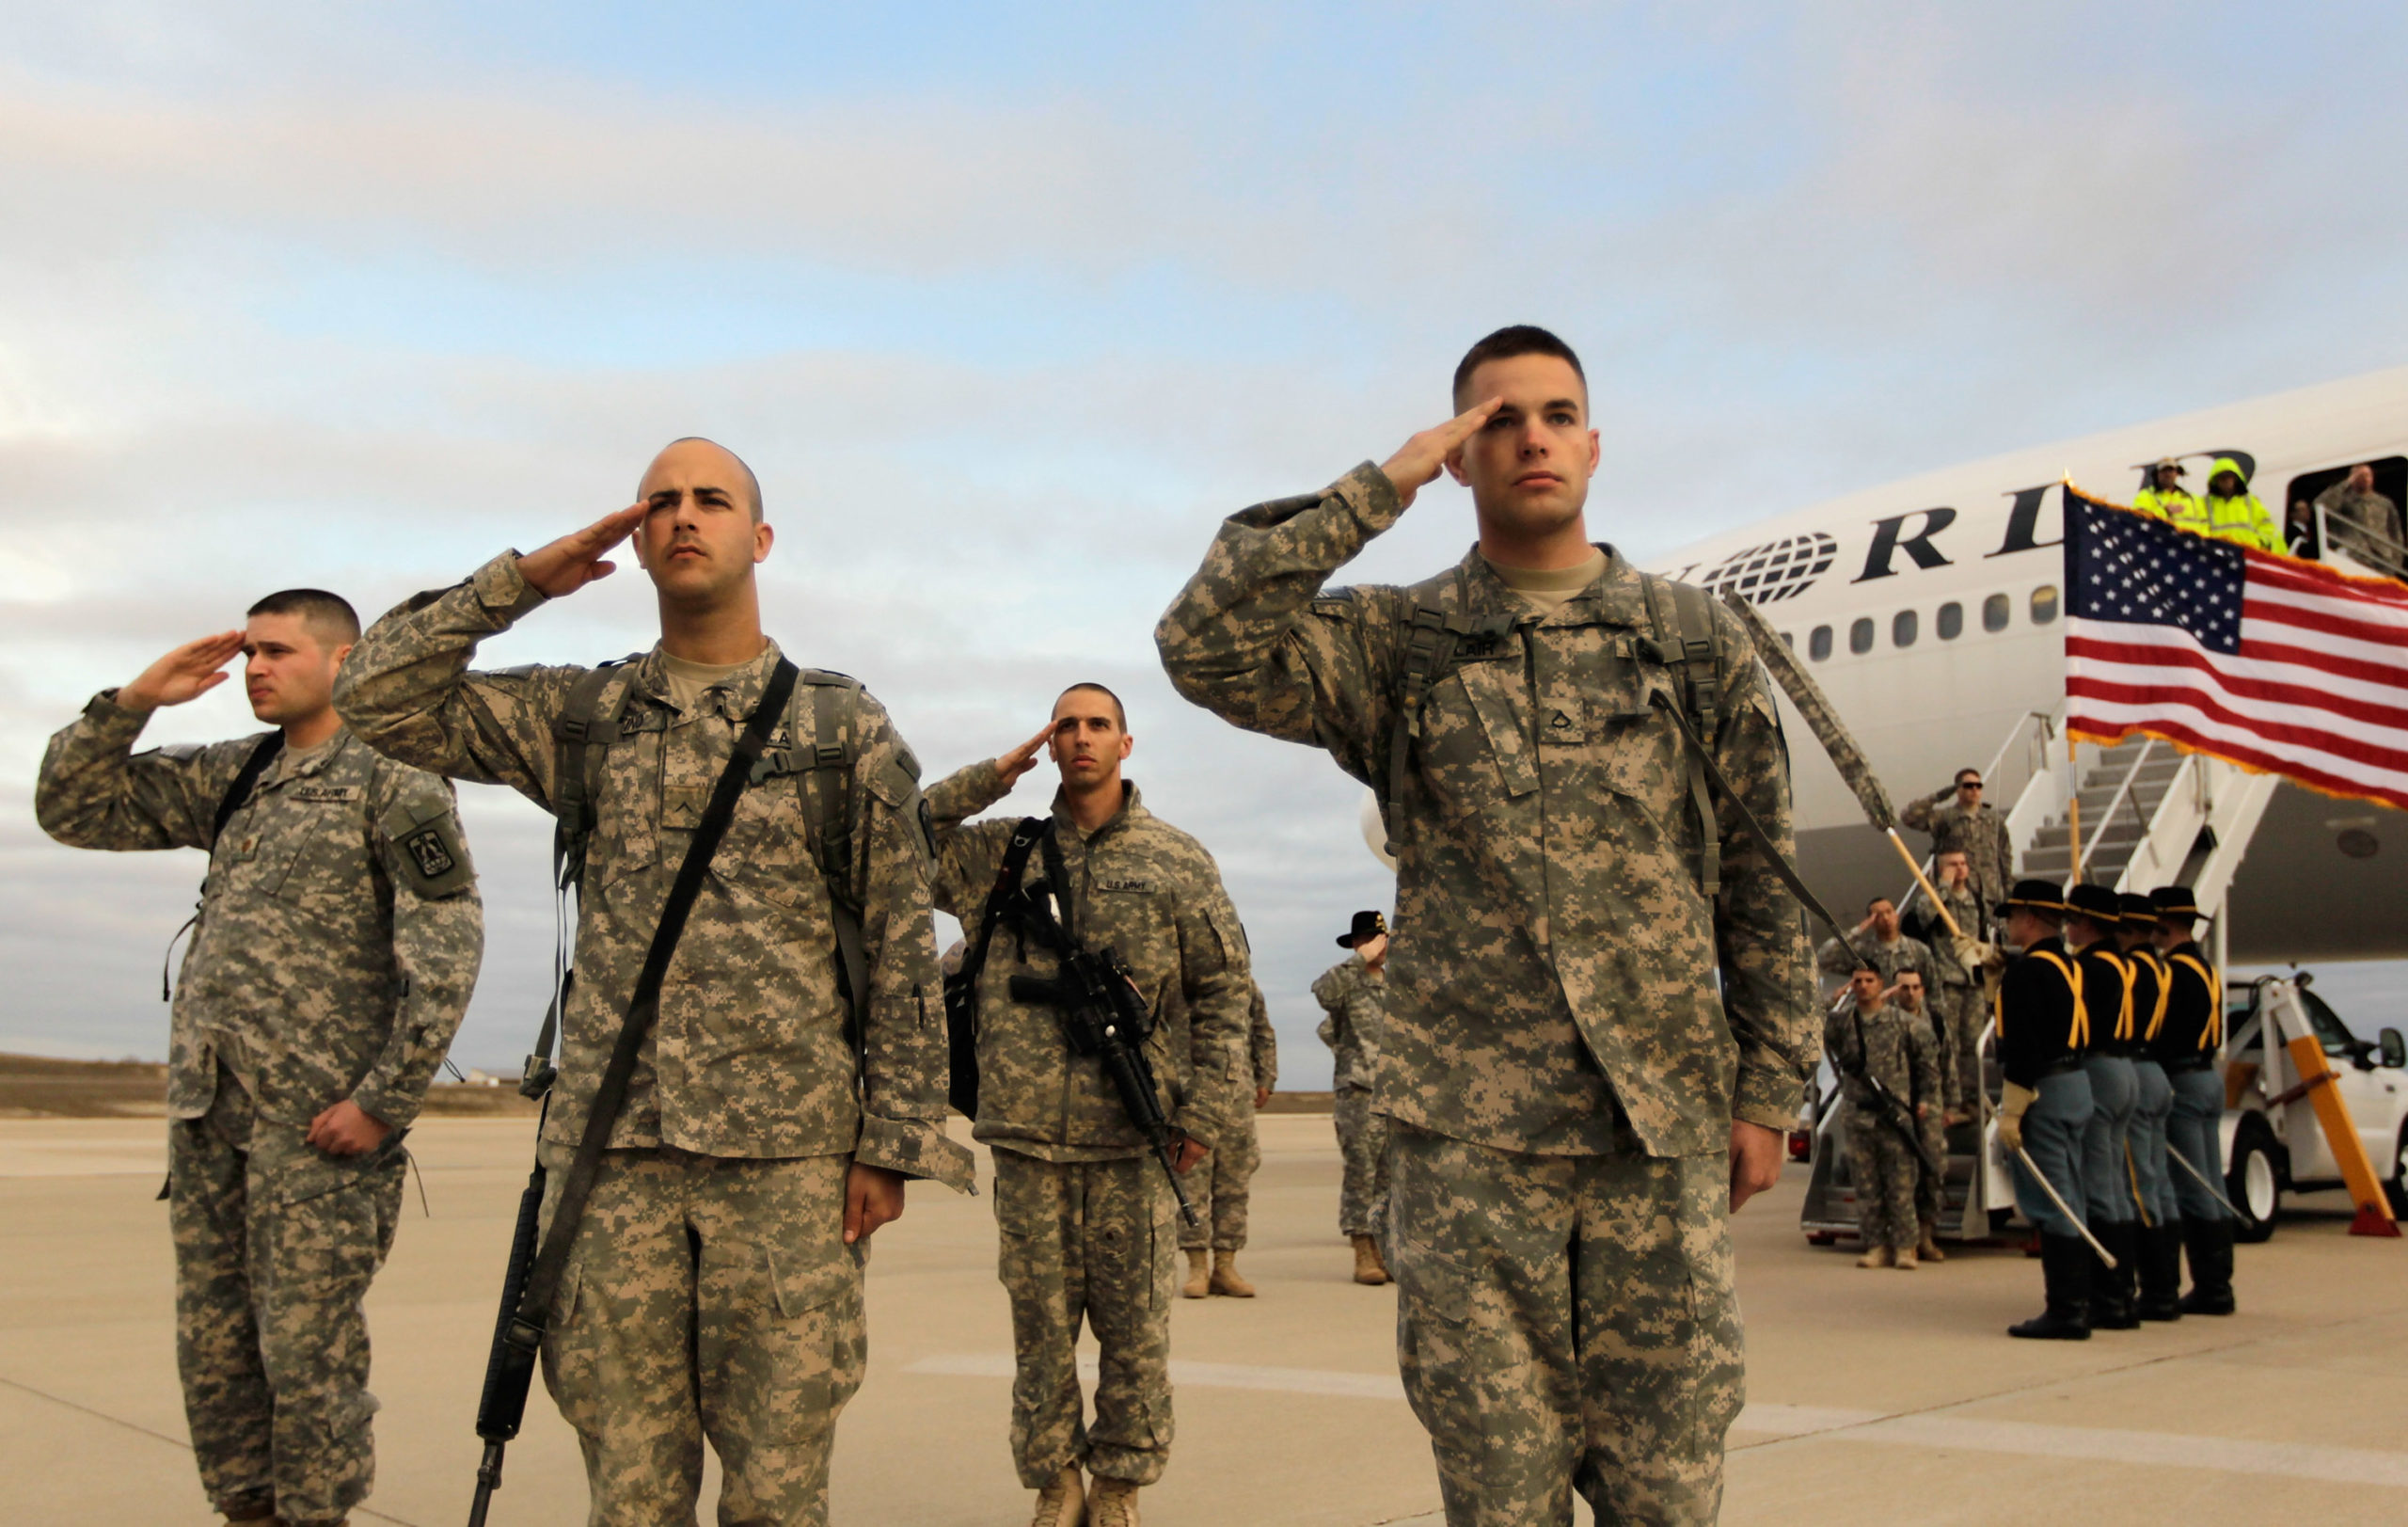 Troops Fly Home From Kuwait To Fort Hood, Texas After U.S. Forces Leave Iraq